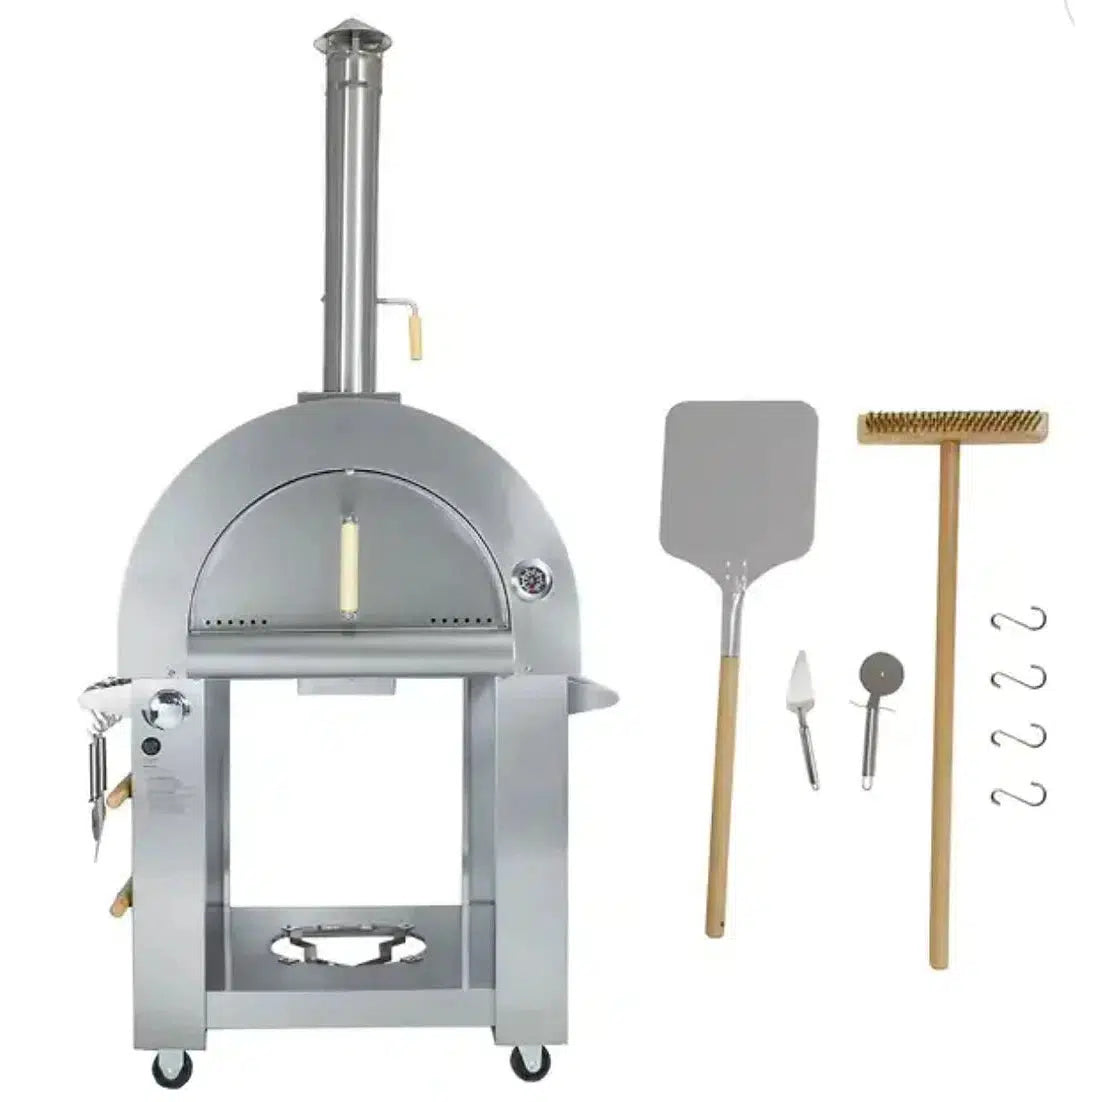 Kokomo Grills 32" Dual Fuel Liquid Propane or Wood Fired Stainless Steel Pizza Oven